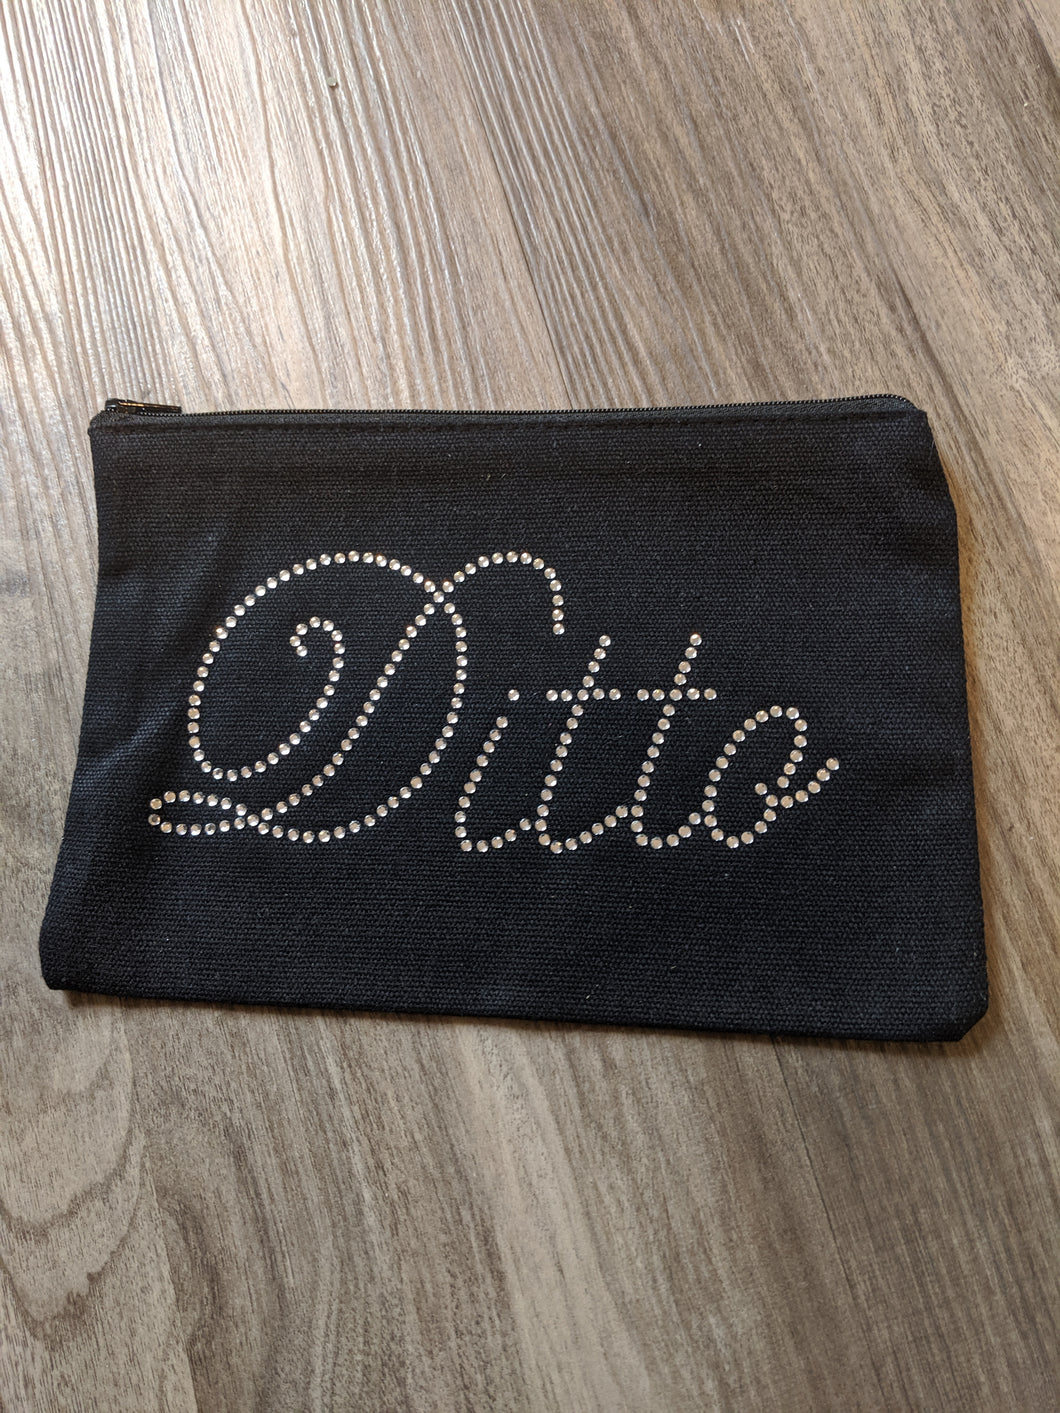 Ditto Stage Makeup Bag